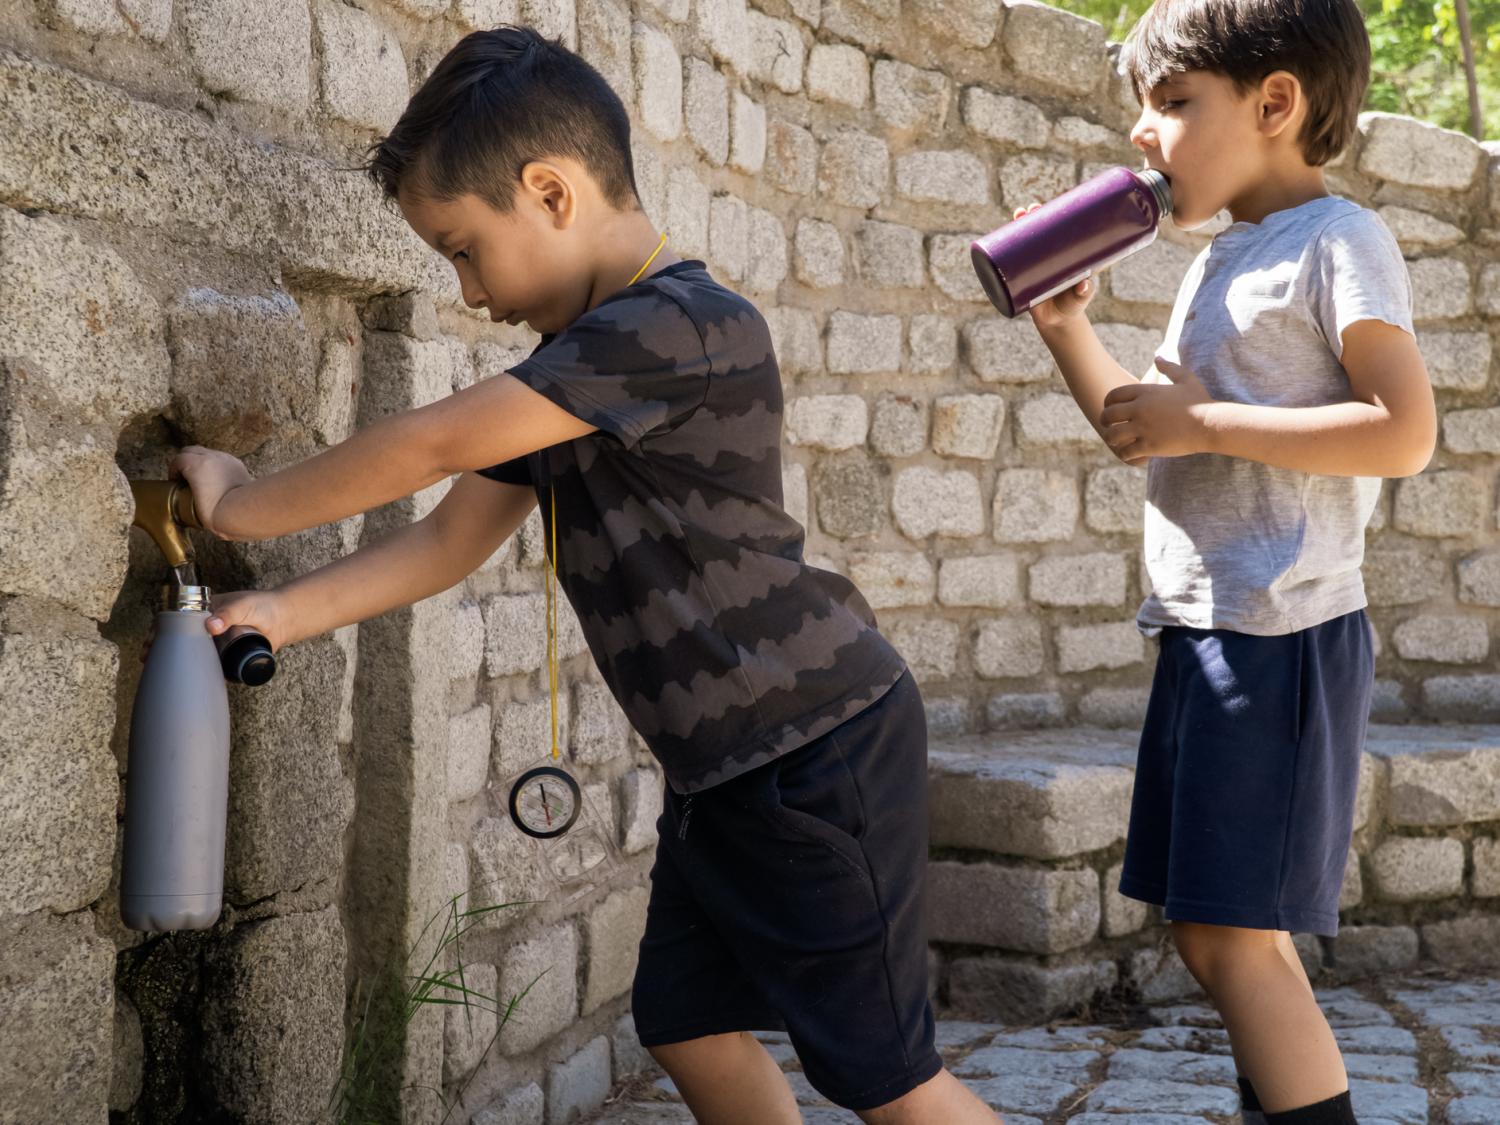 Two young Hispanic children filling water bottles at an outside water fountain.